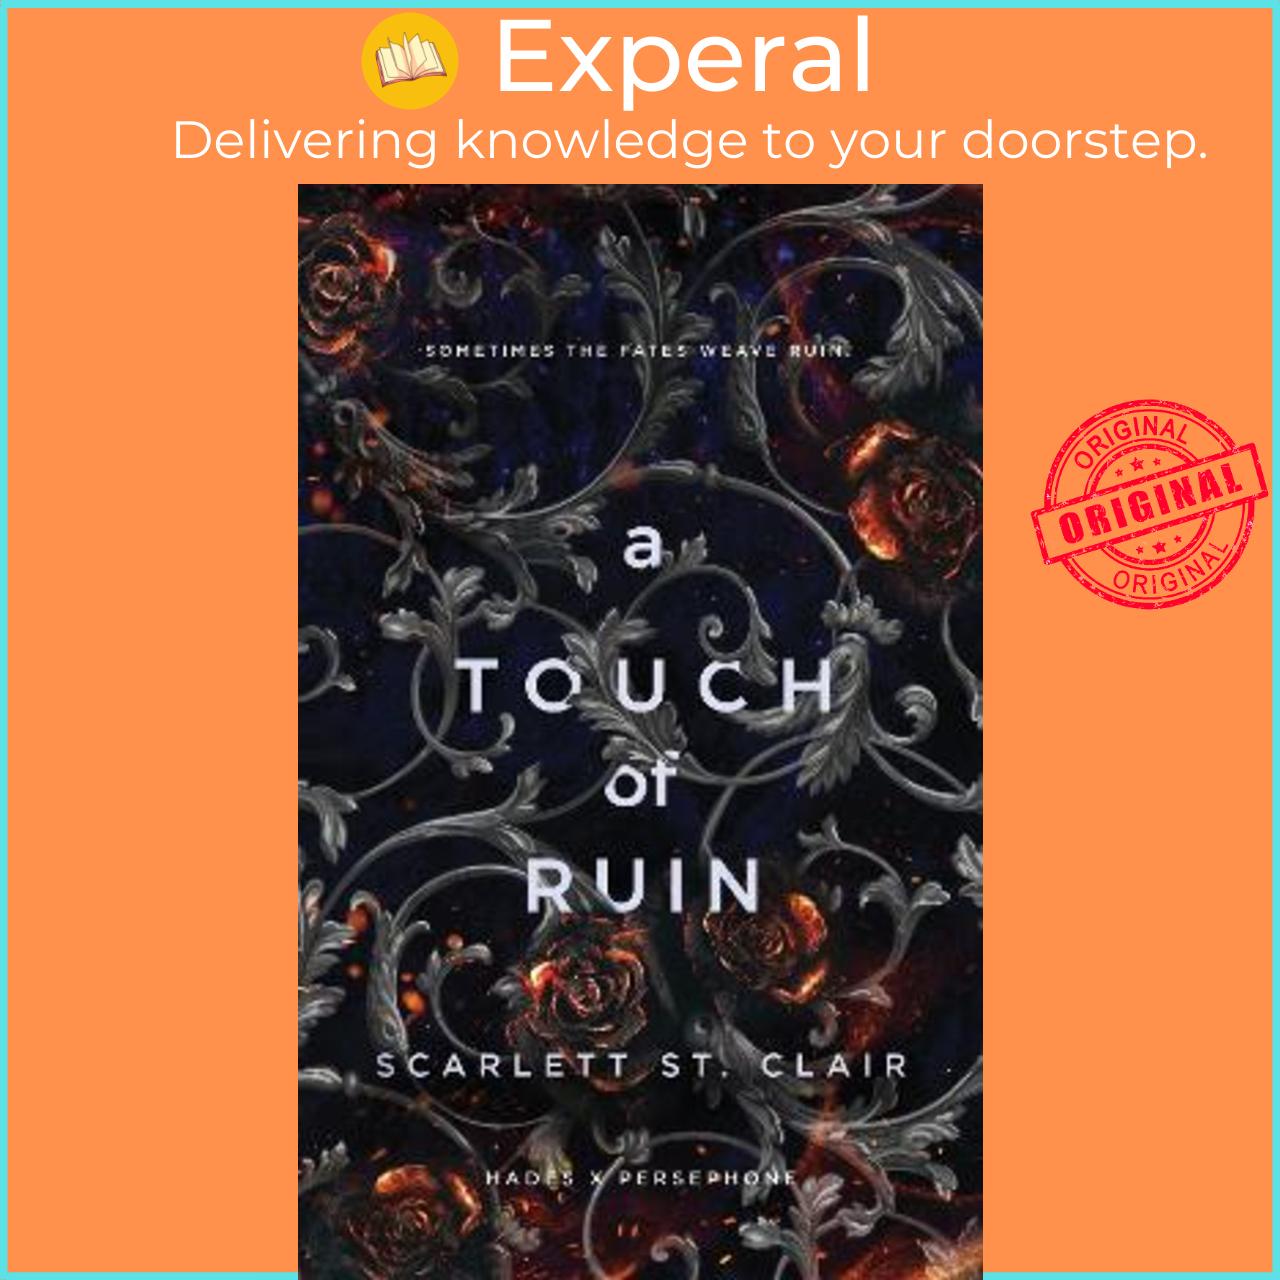 Sách - A Touch of Ruin by Scarlett St. Clair (US edition, paperback)